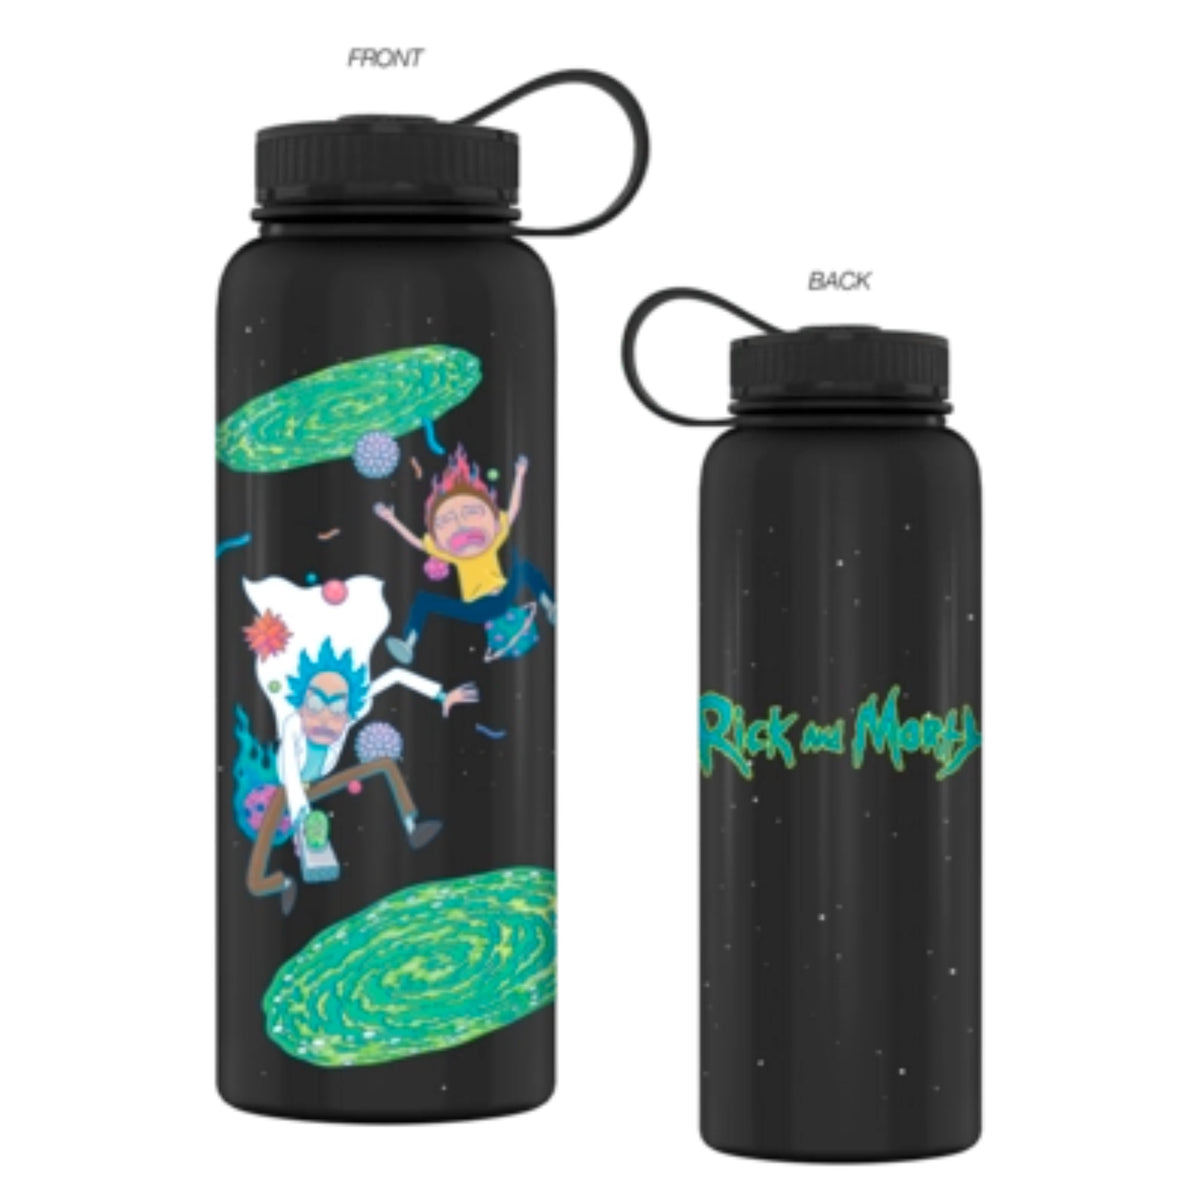 Rick and Morty 42oz Stainless Steel Water Bottle W Twist Lid